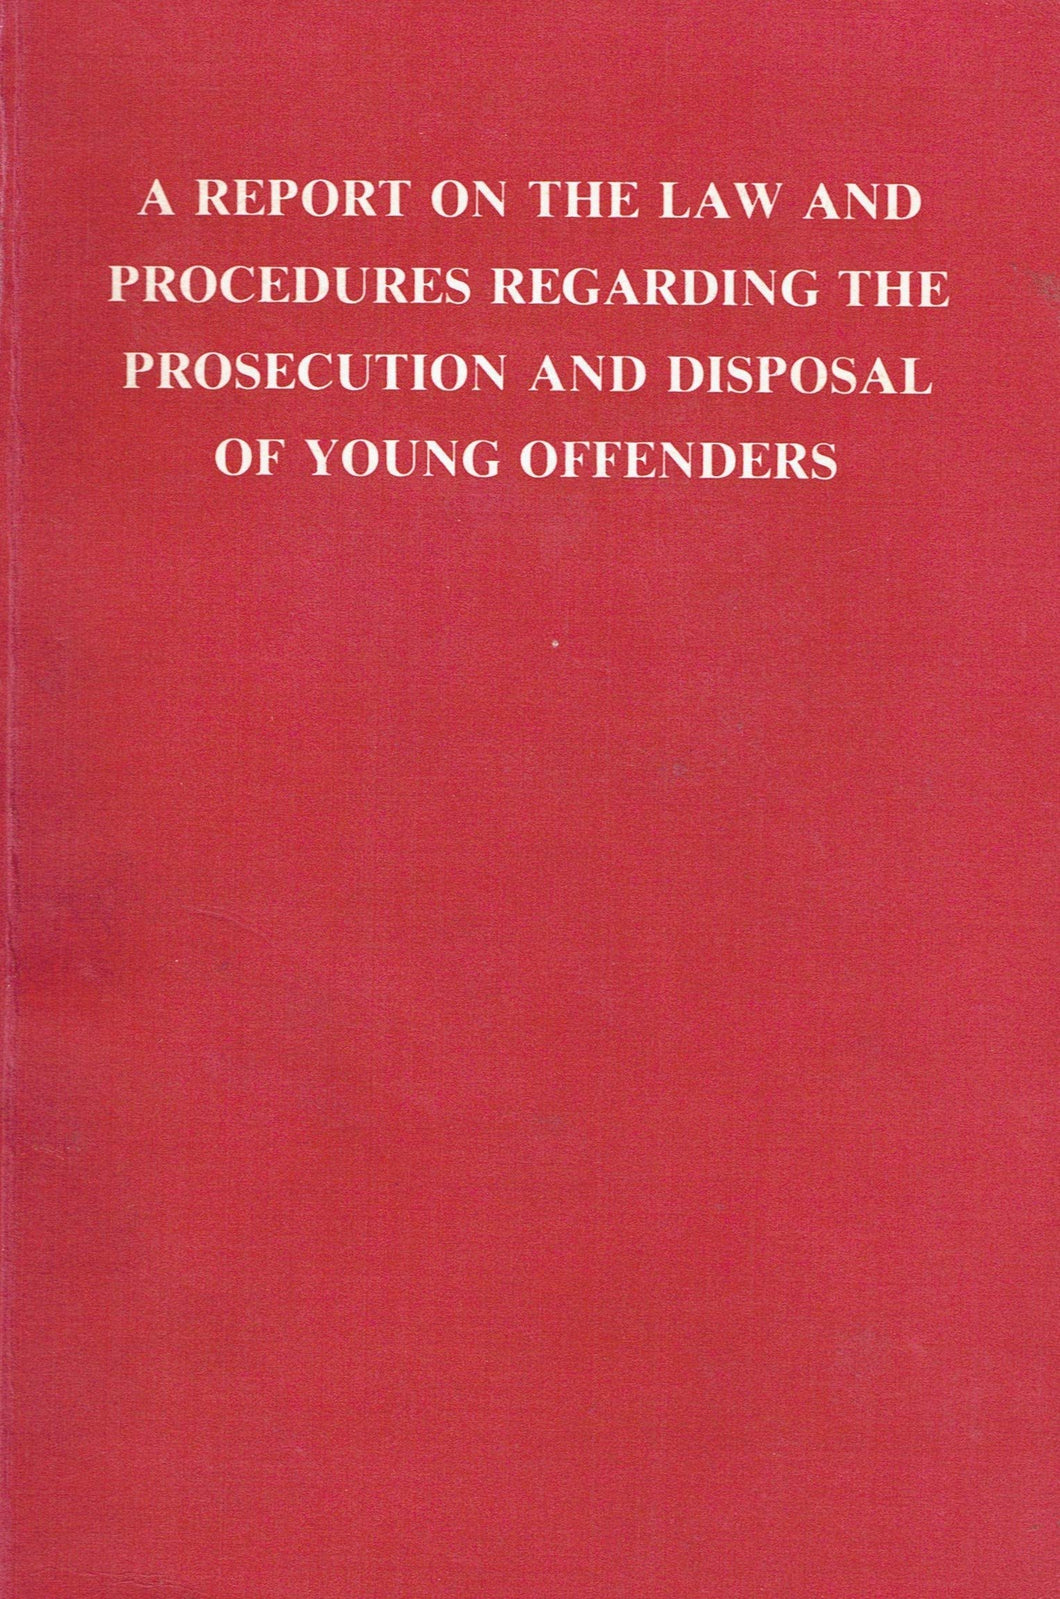 Young offenders: A report on the law and procedures regarding the prosecution and disposal of young offenders